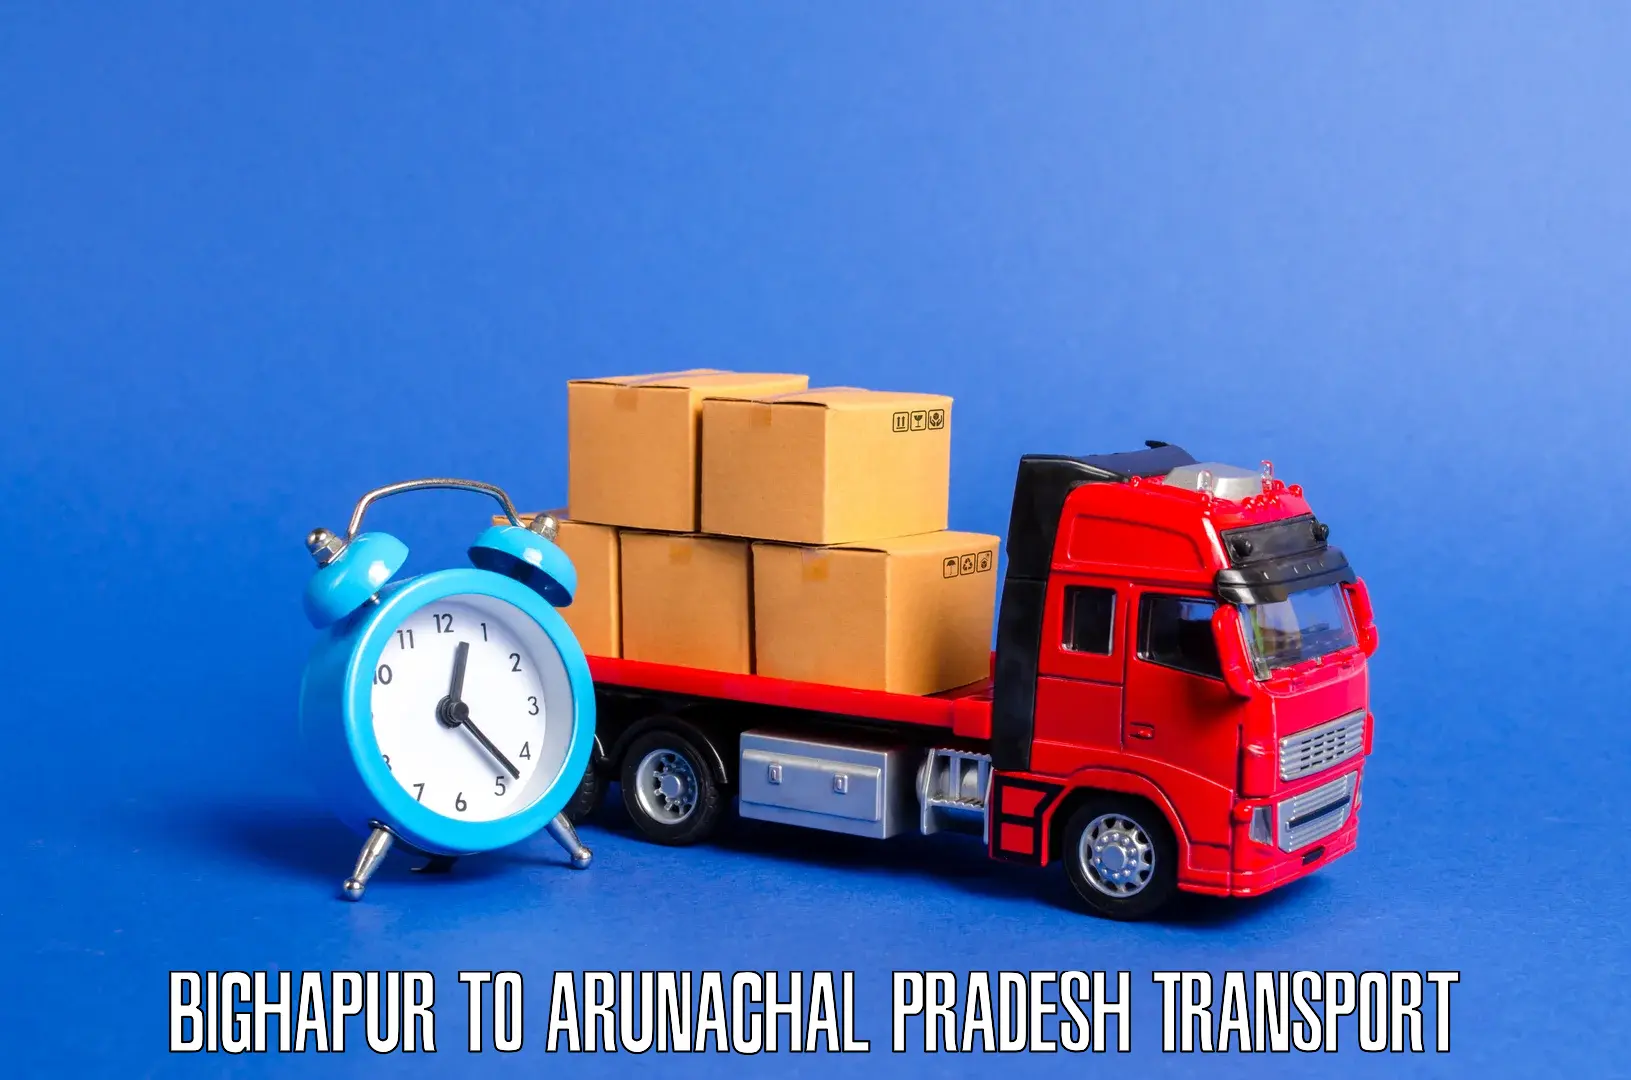 Parcel transport services Bighapur to Changlang